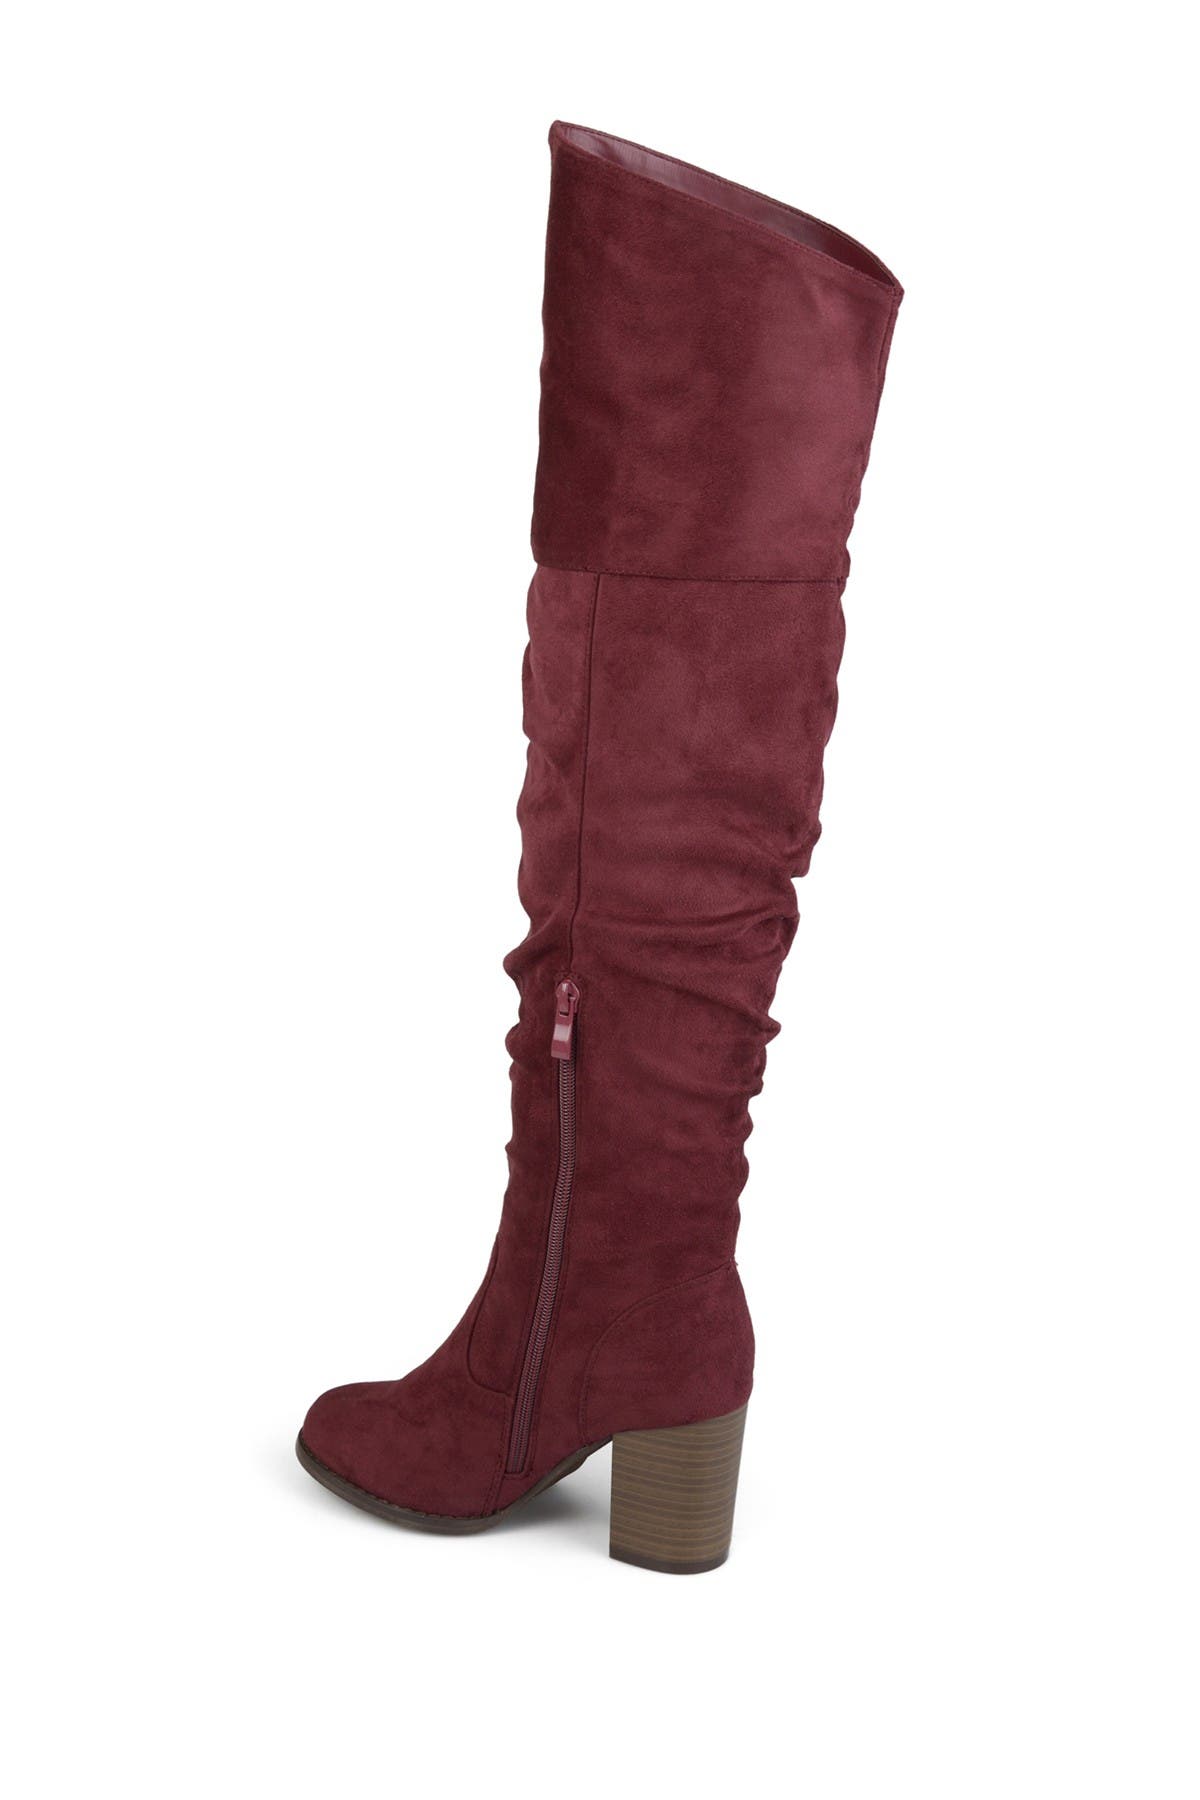 Journee Collection Kaison Ruched Tall Boot In Dark Red4